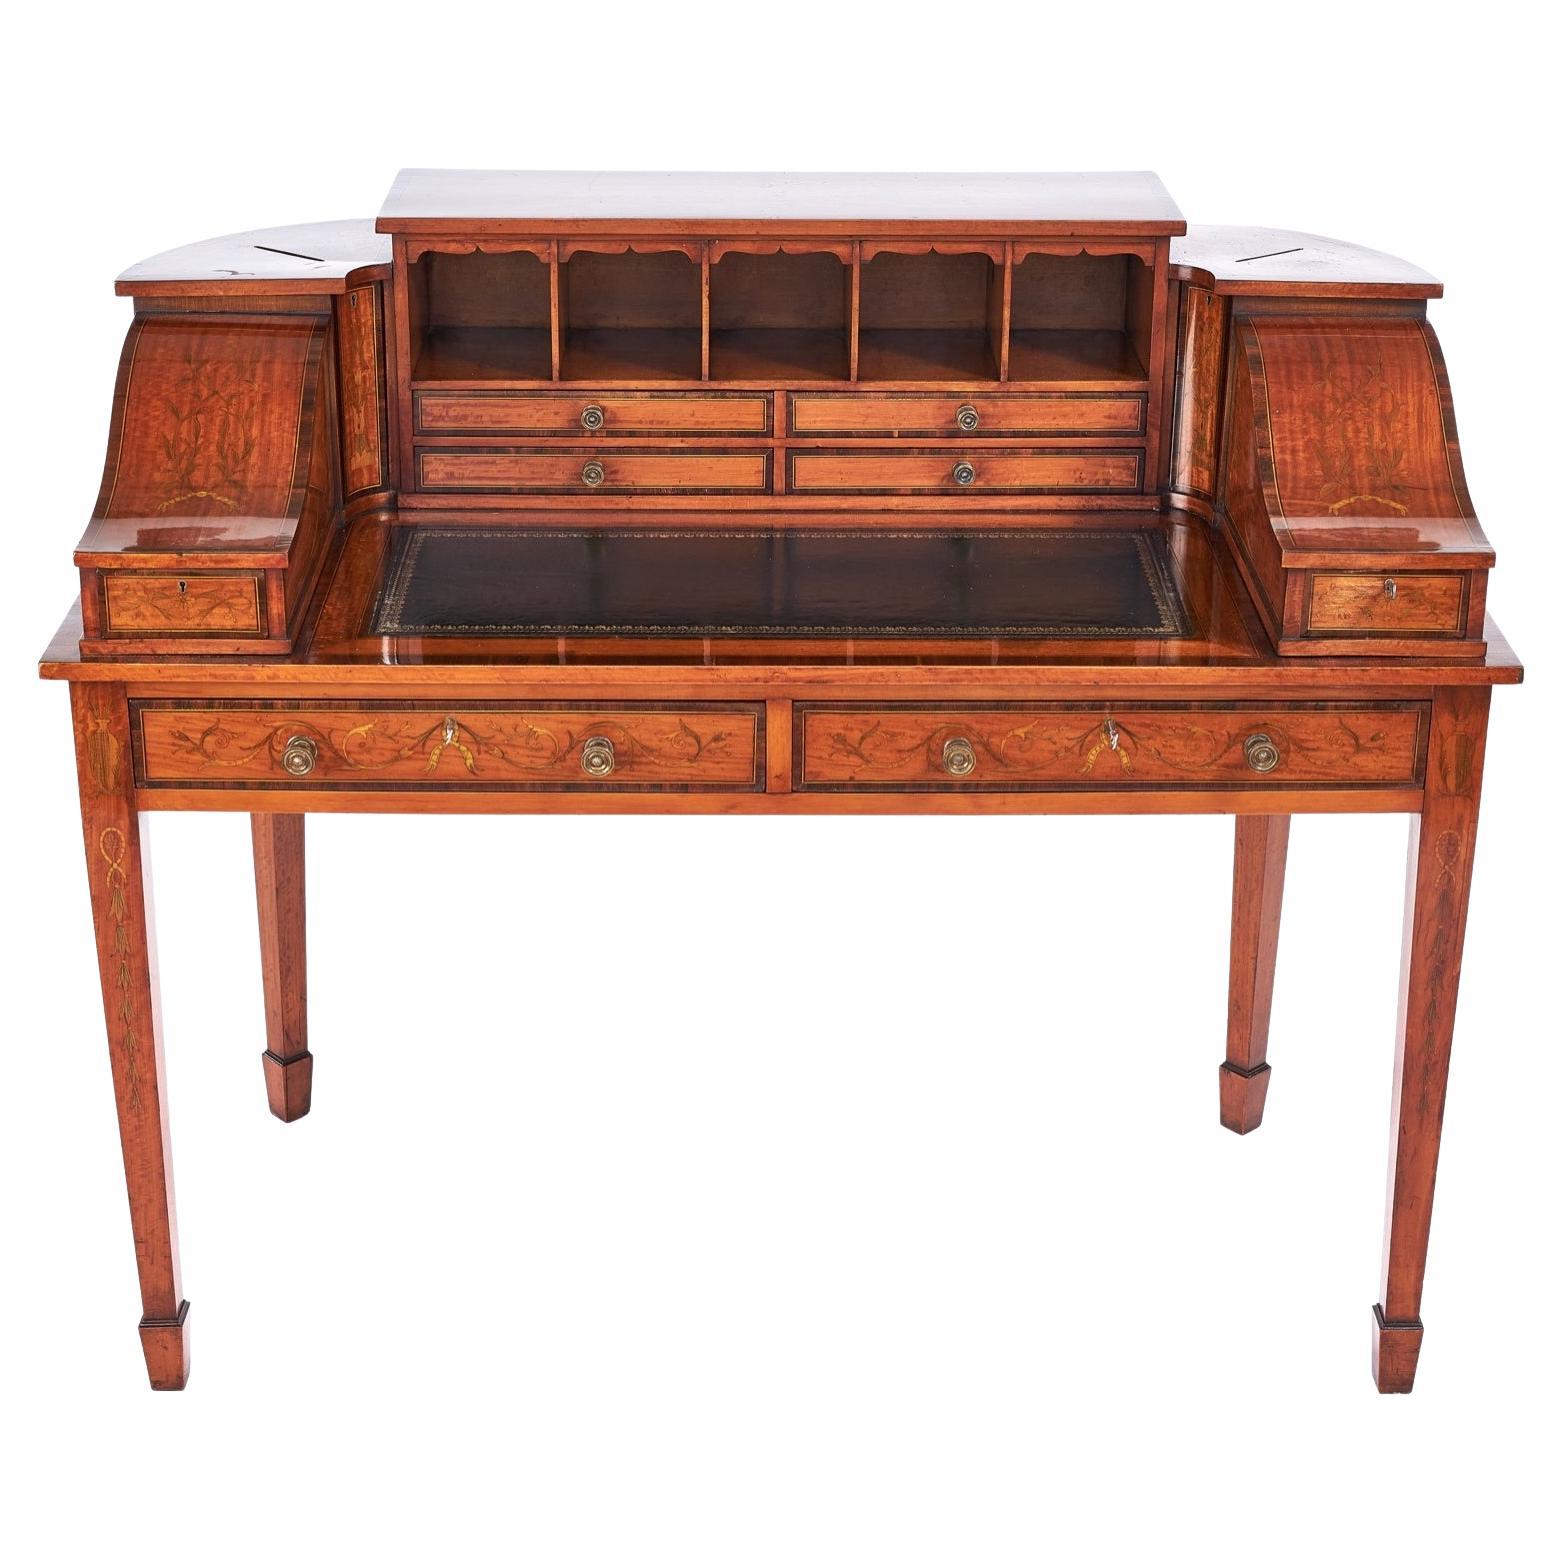 Fine Sheraton Revival Satinwood Inlaid Carlton House Desk. with Letter Boxes, Ci